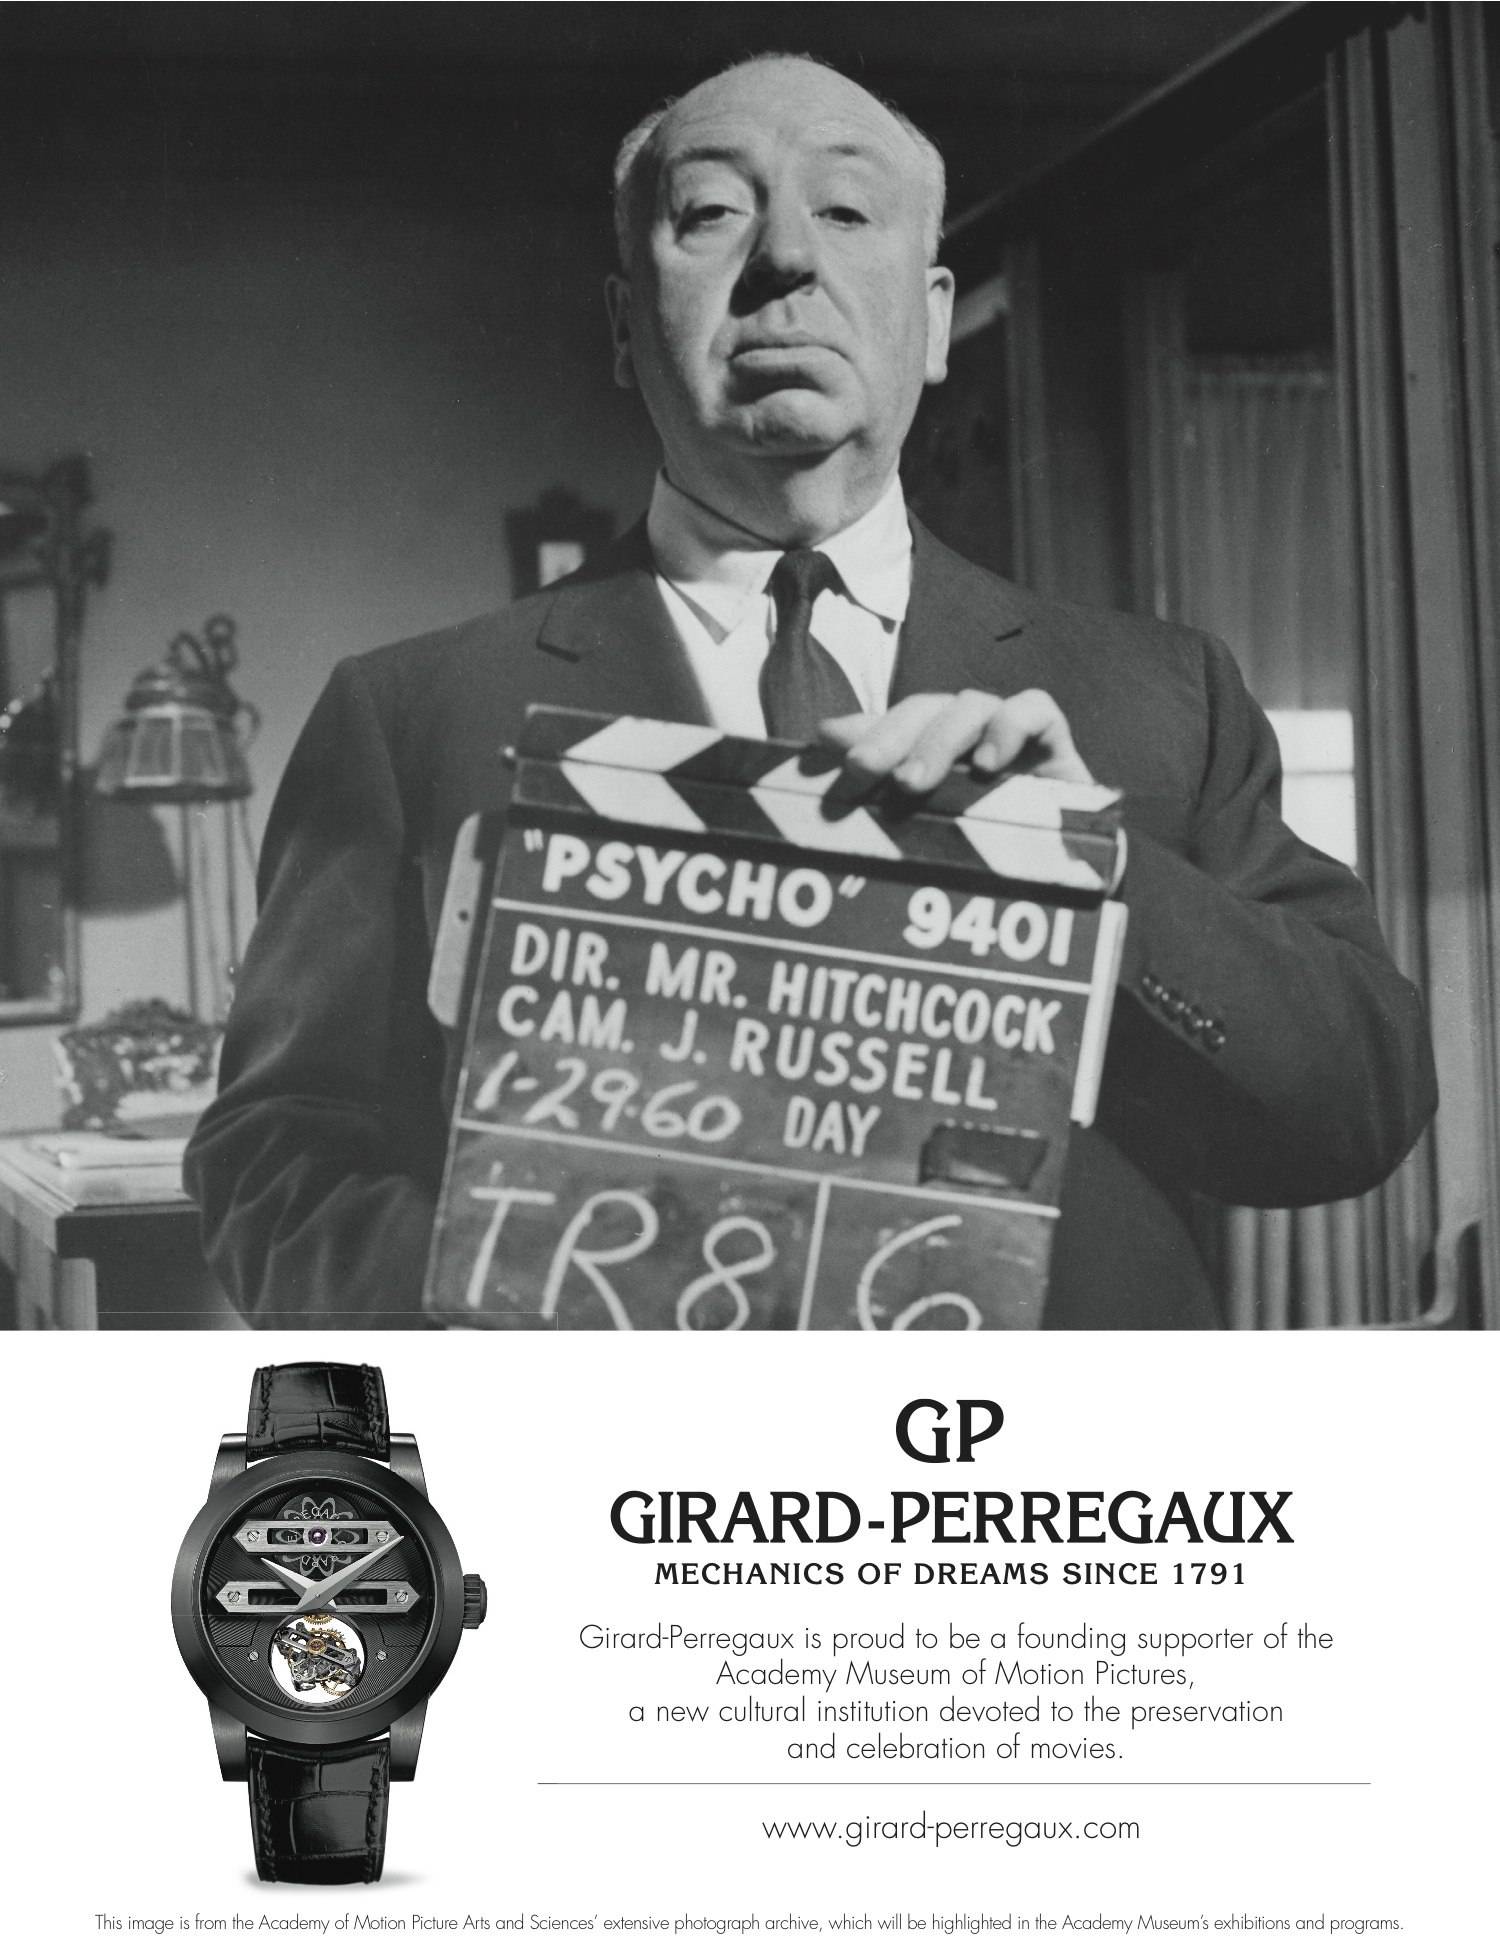 Hitchcock Stars in Girard-Perregaux’s First Image From Partnership With the Academy Museum of Motion Pictures